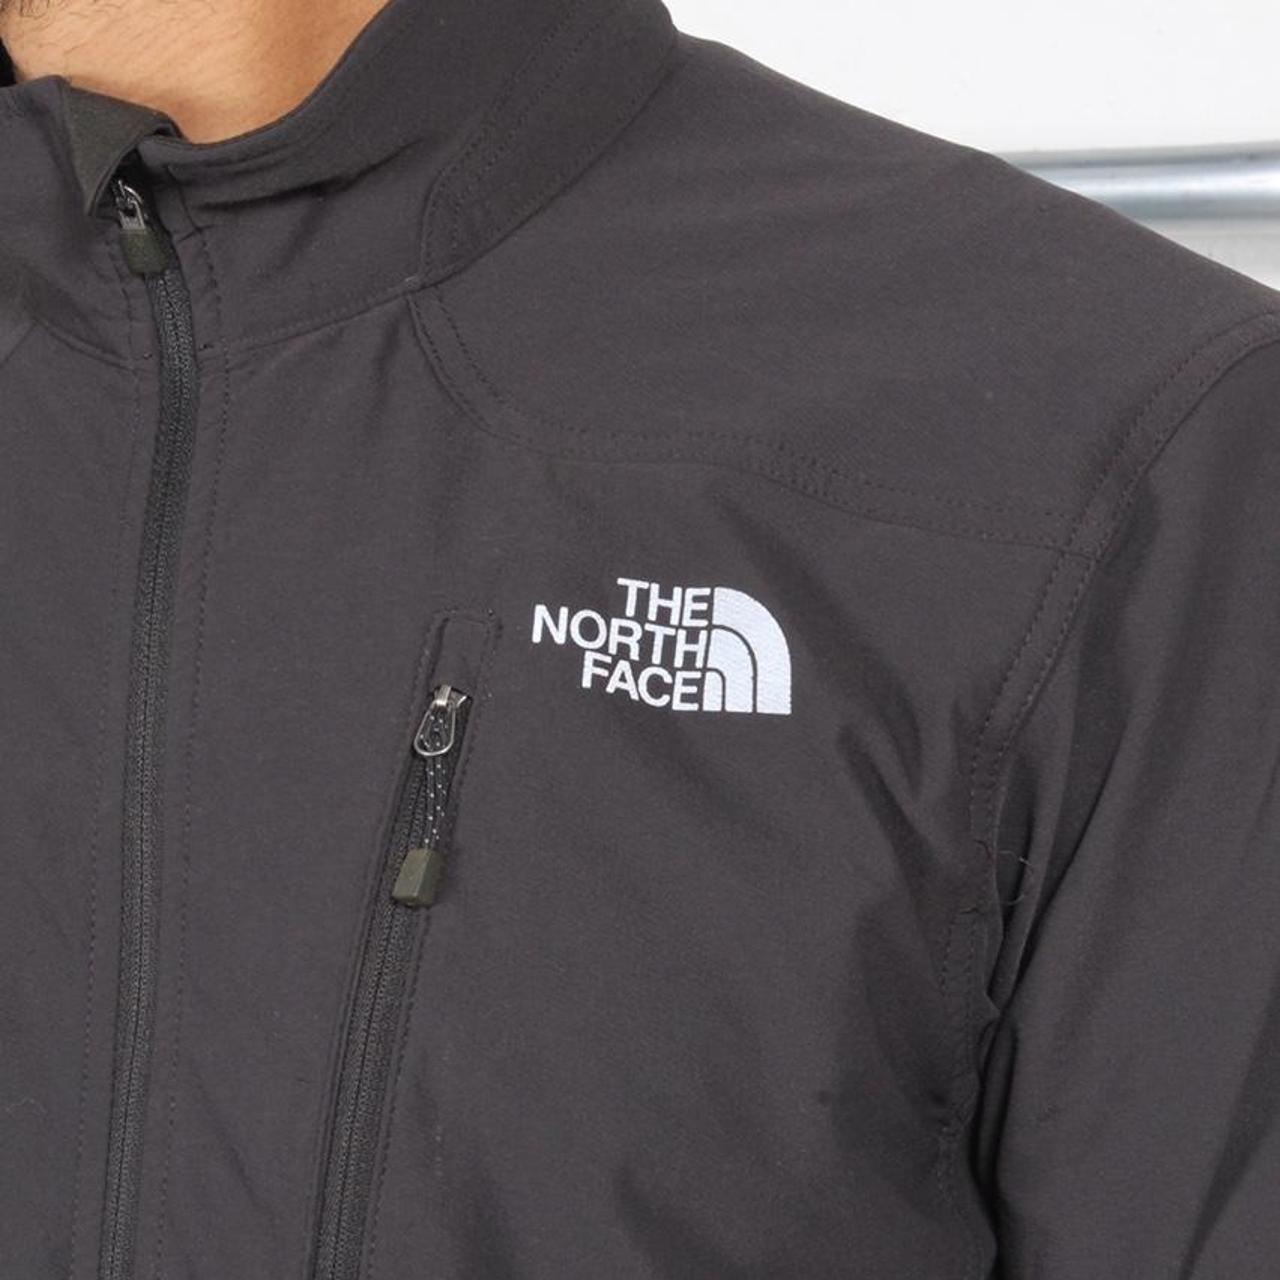 TNF The North Face jacket in black with embroidered... - Depop